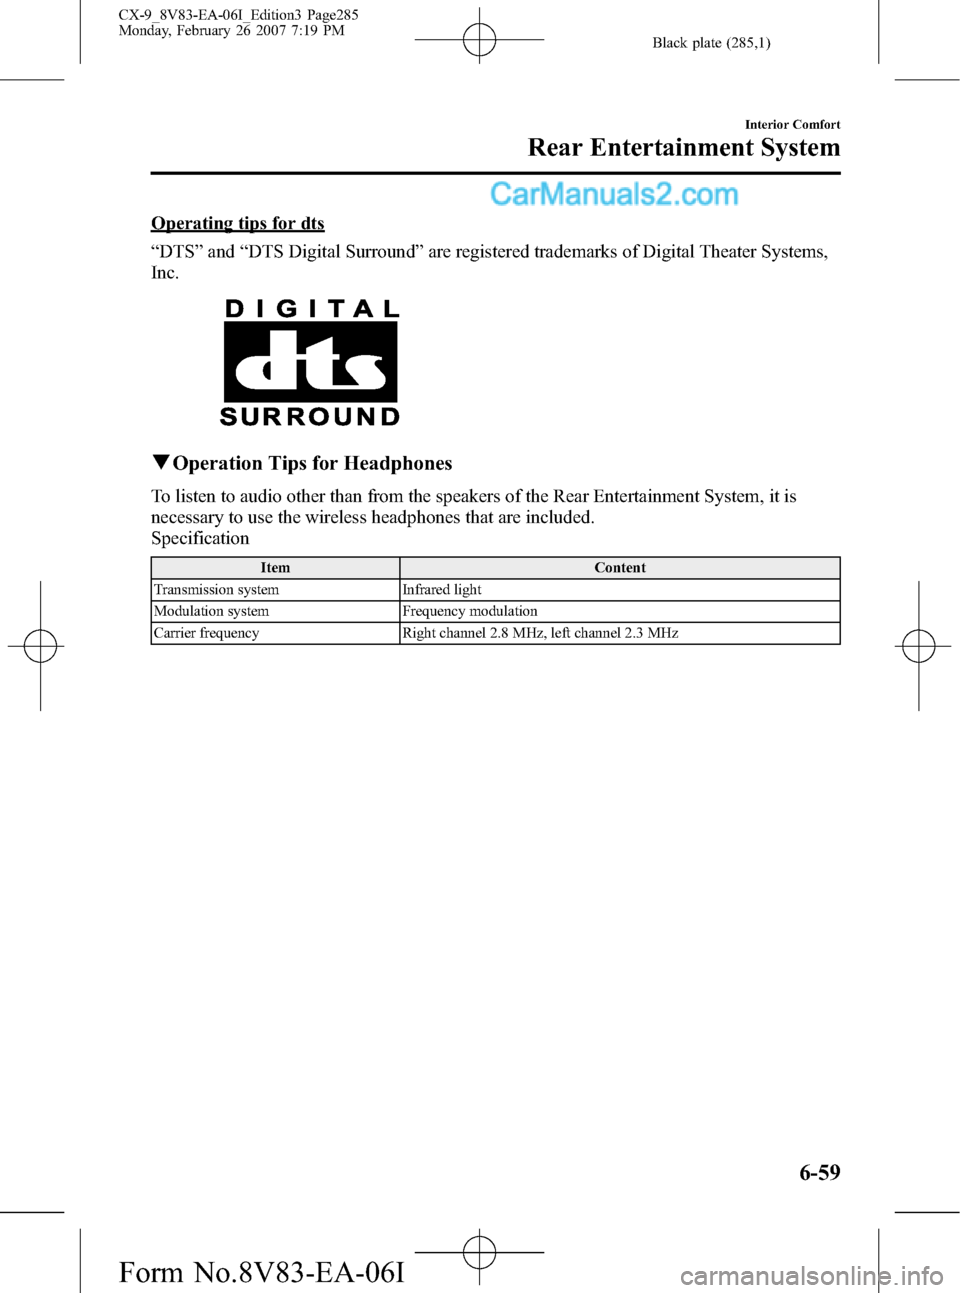 MAZDA MODEL CX-9 2007  Owners Manual (in English) Black plate (285,1)
Operating tips for dts
“DTS”and“DTS Digital Surround”are registered trademarks of Digital Theater Systems,
Inc.
qOperation Tips for Headphones
To listen to audio other than